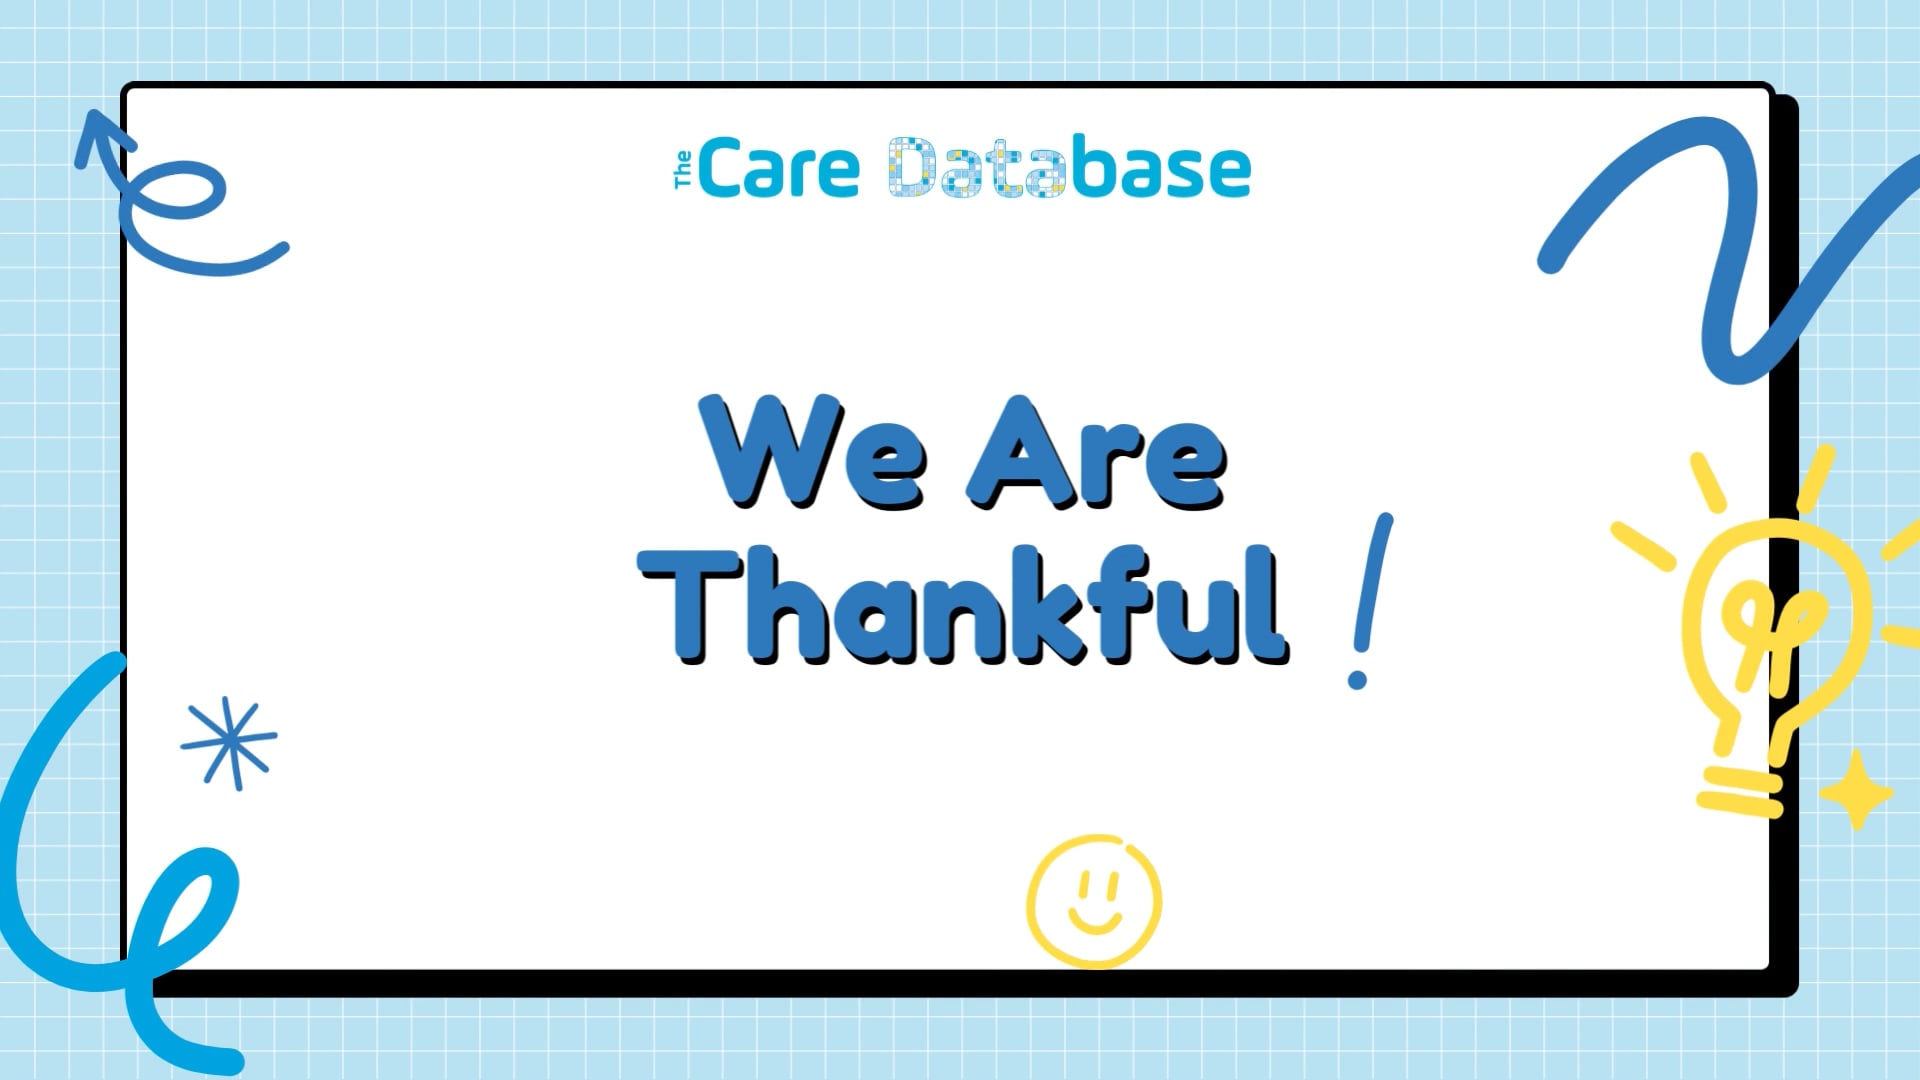 The Care Database